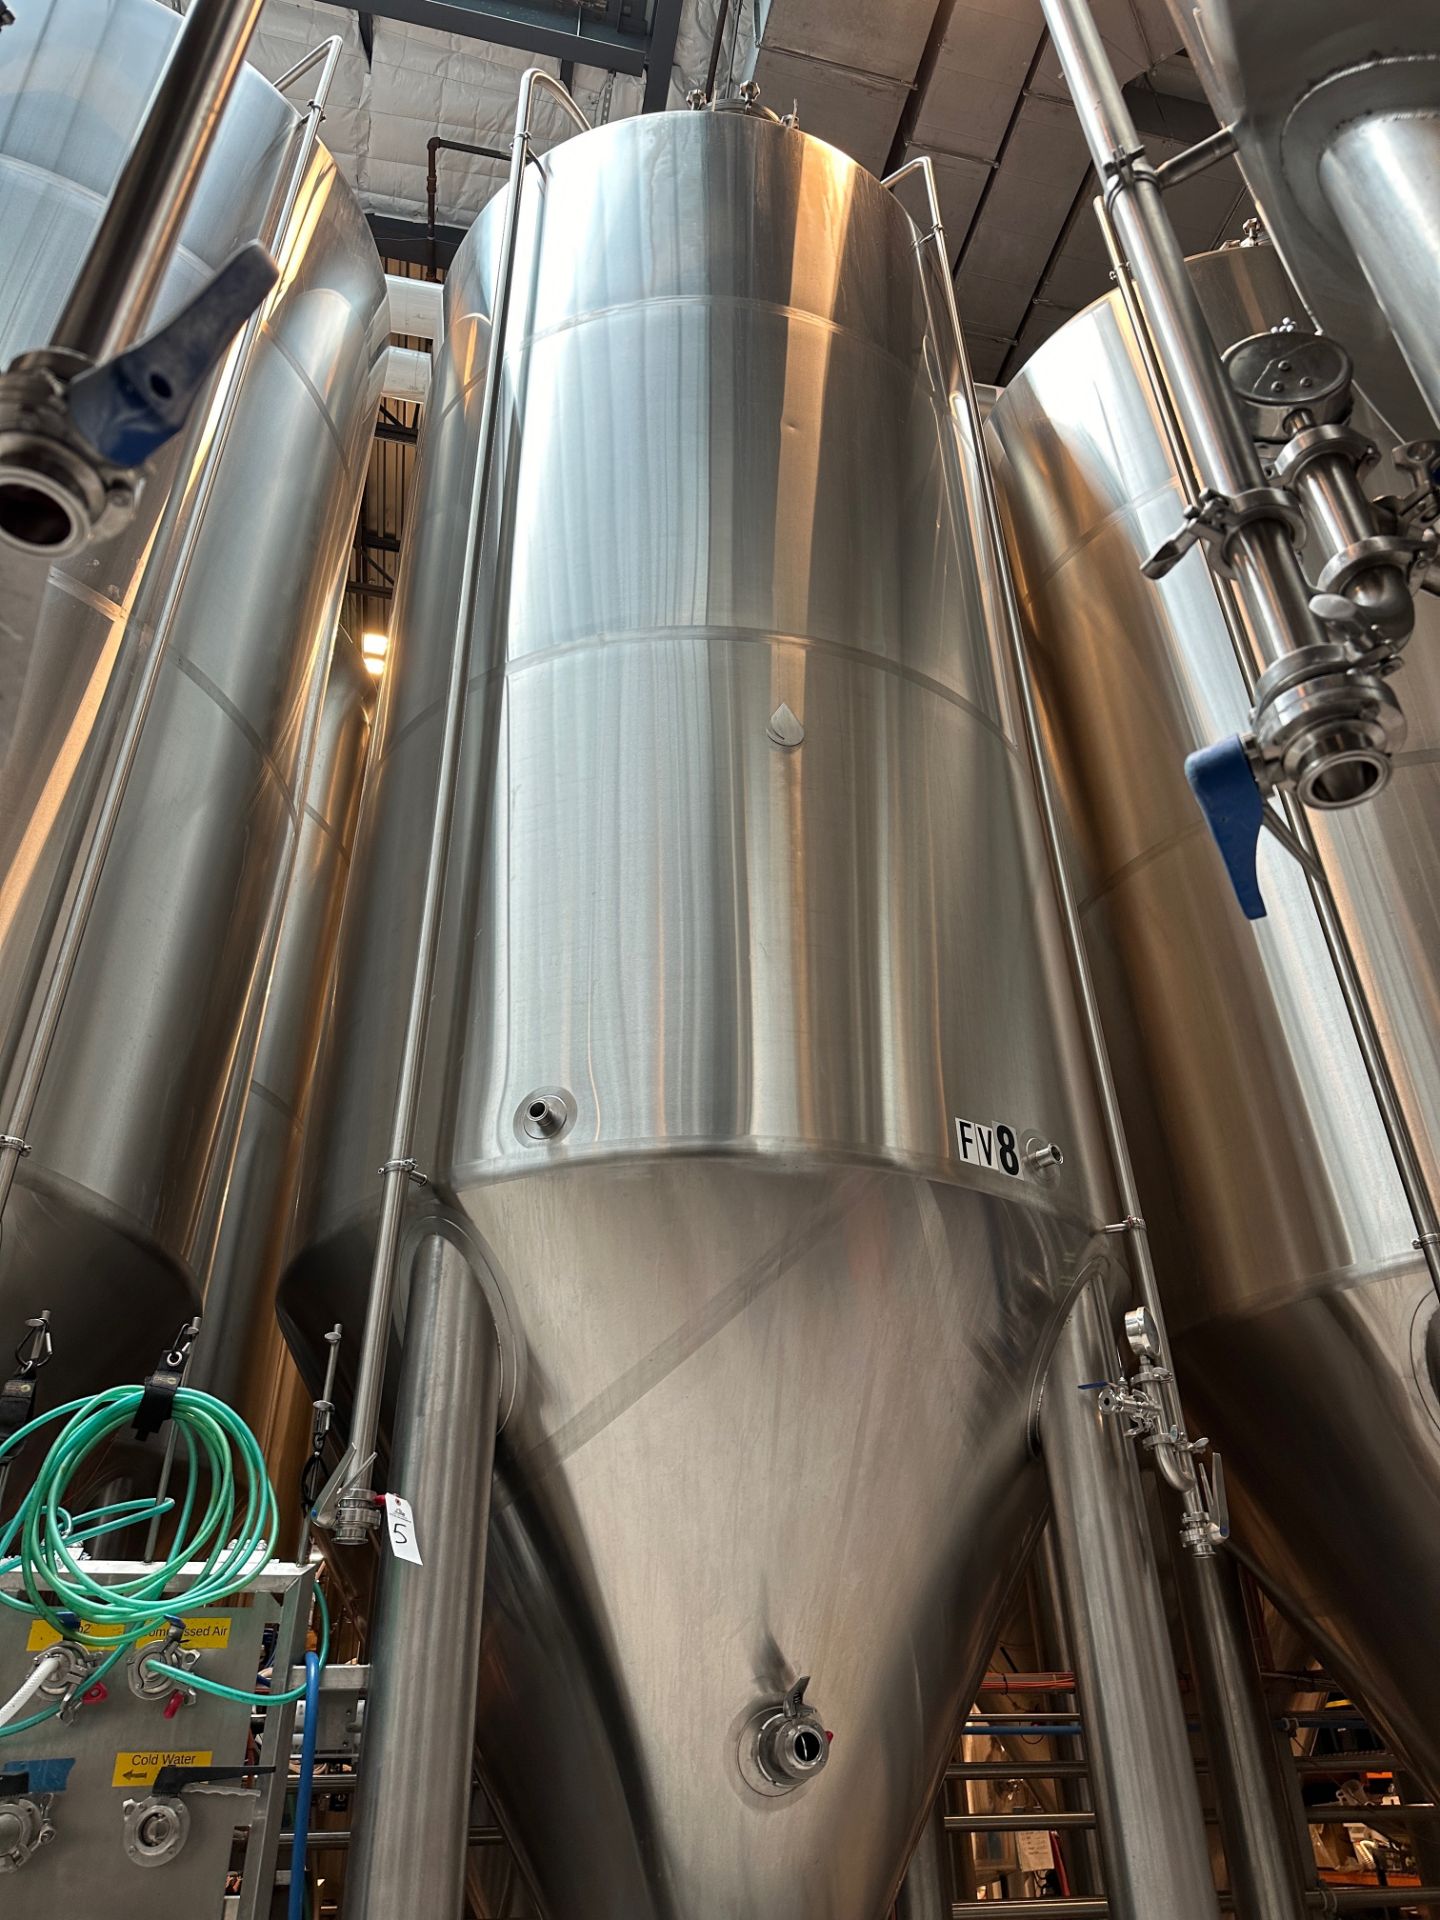 Complete 40 BBL Microbrewery - 40 BBL Deutsche 4-Vessel Brewhouse, Tanks, Can Line - See Description - Image 29 of 335